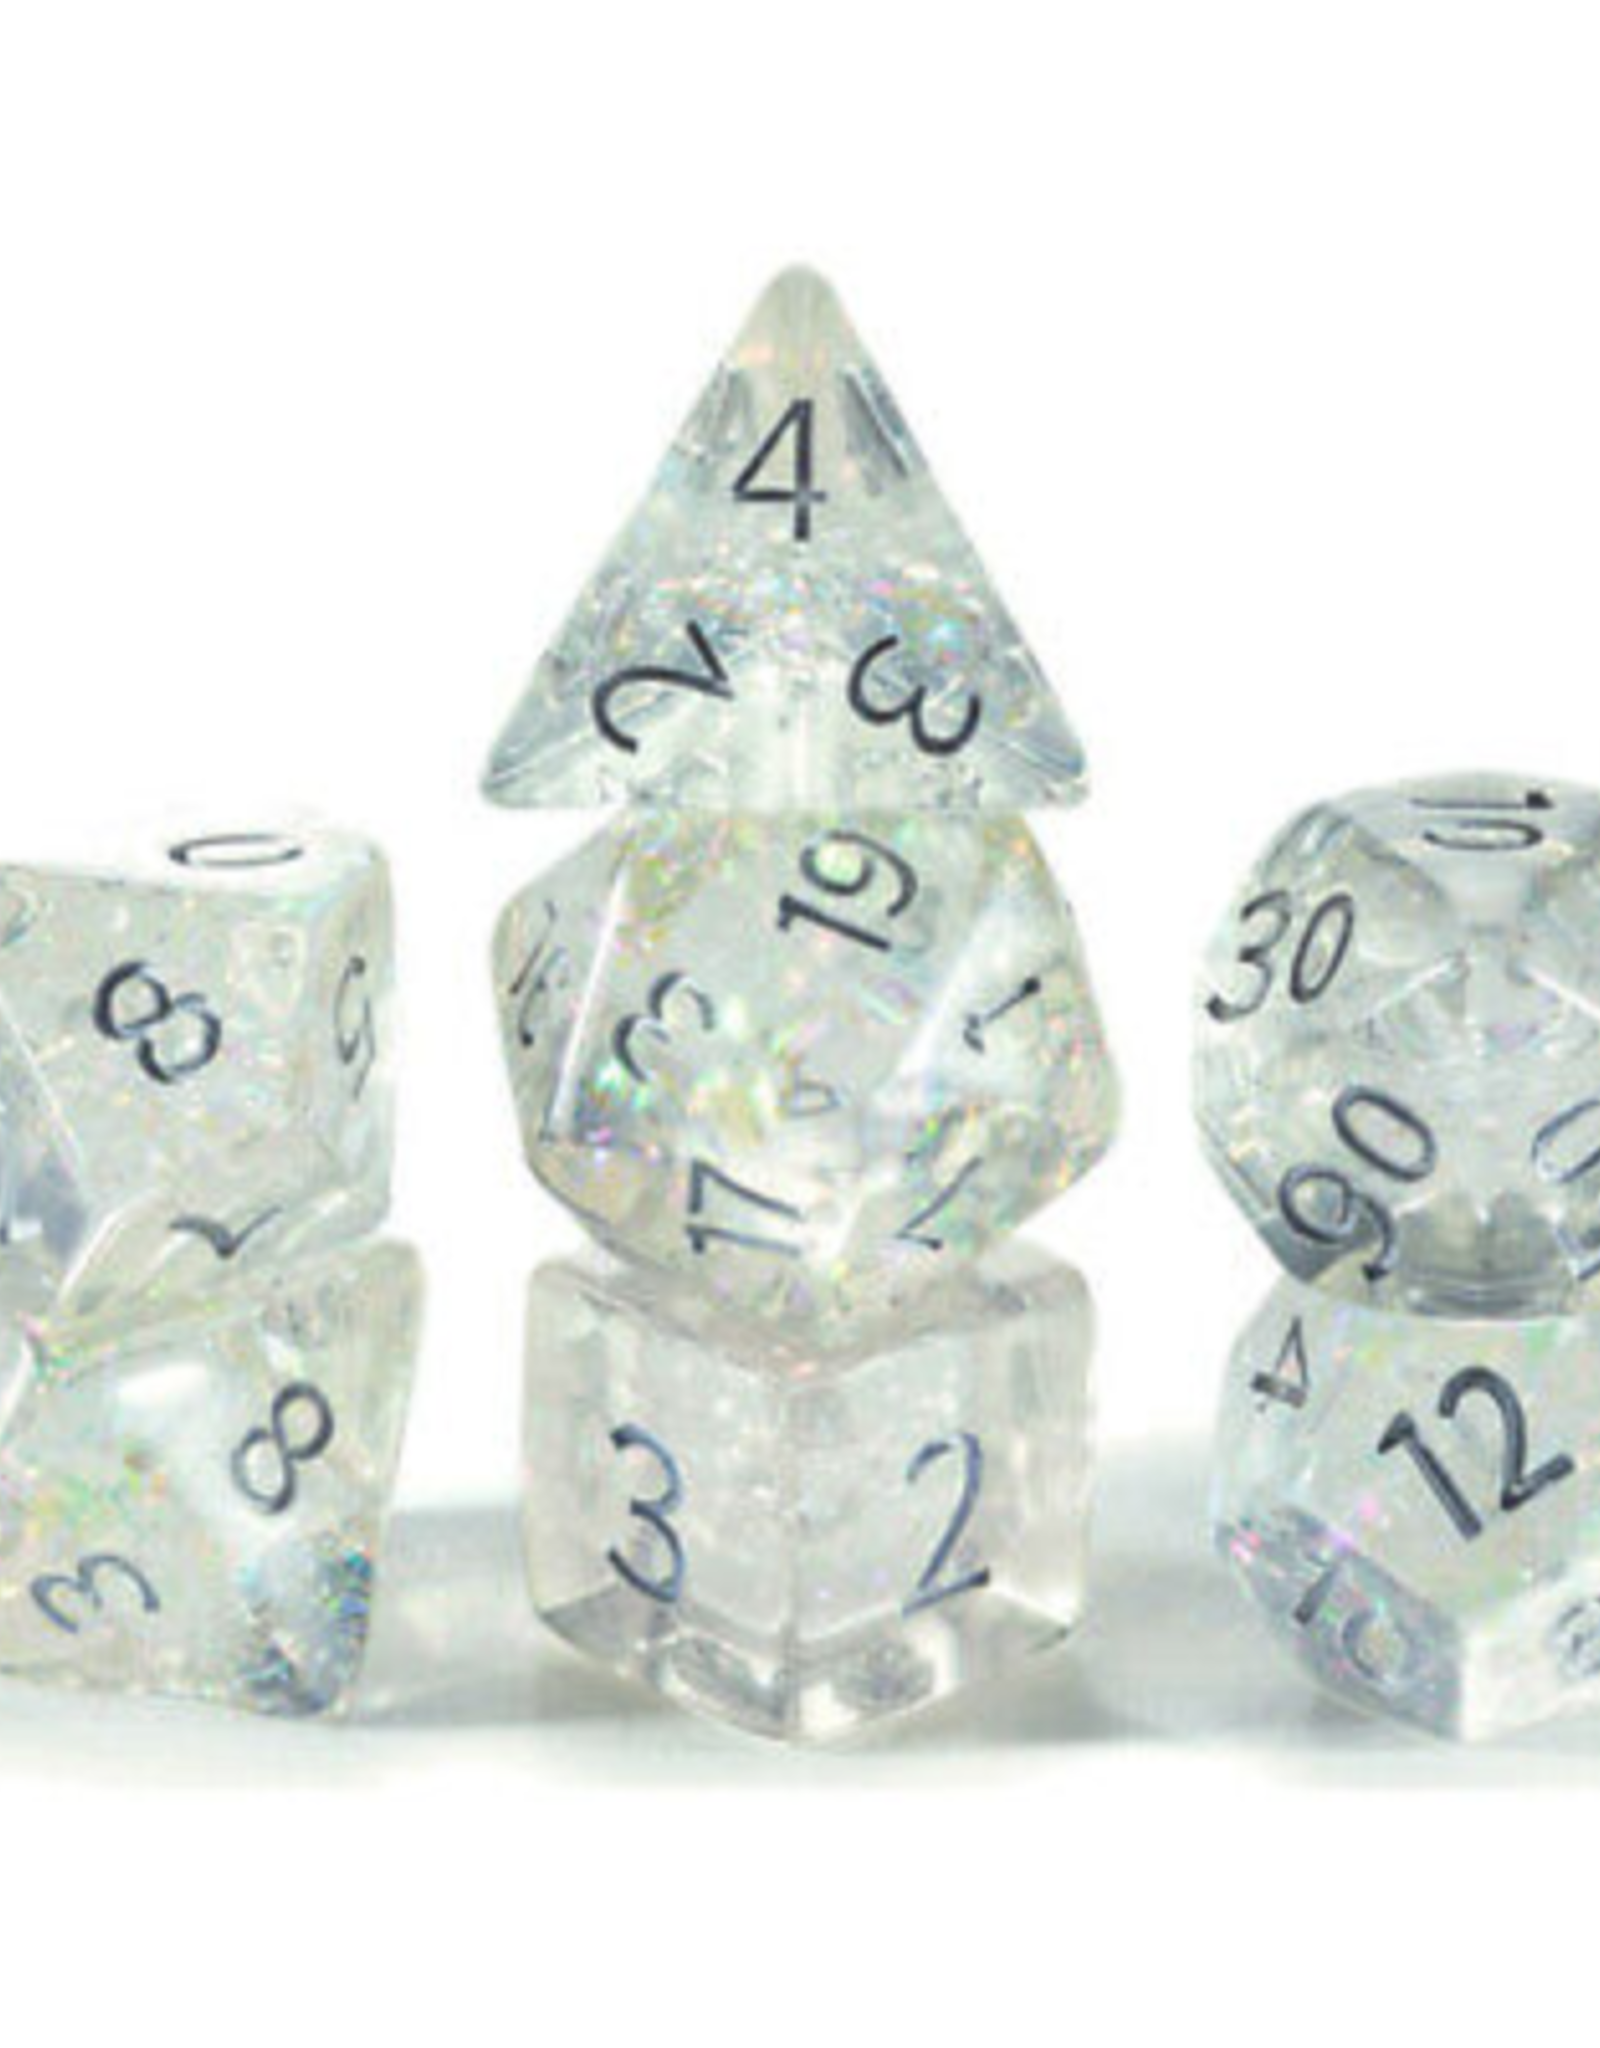 Gate Keeper Games Polyhedral Dice Set: Holographic - Unicorn